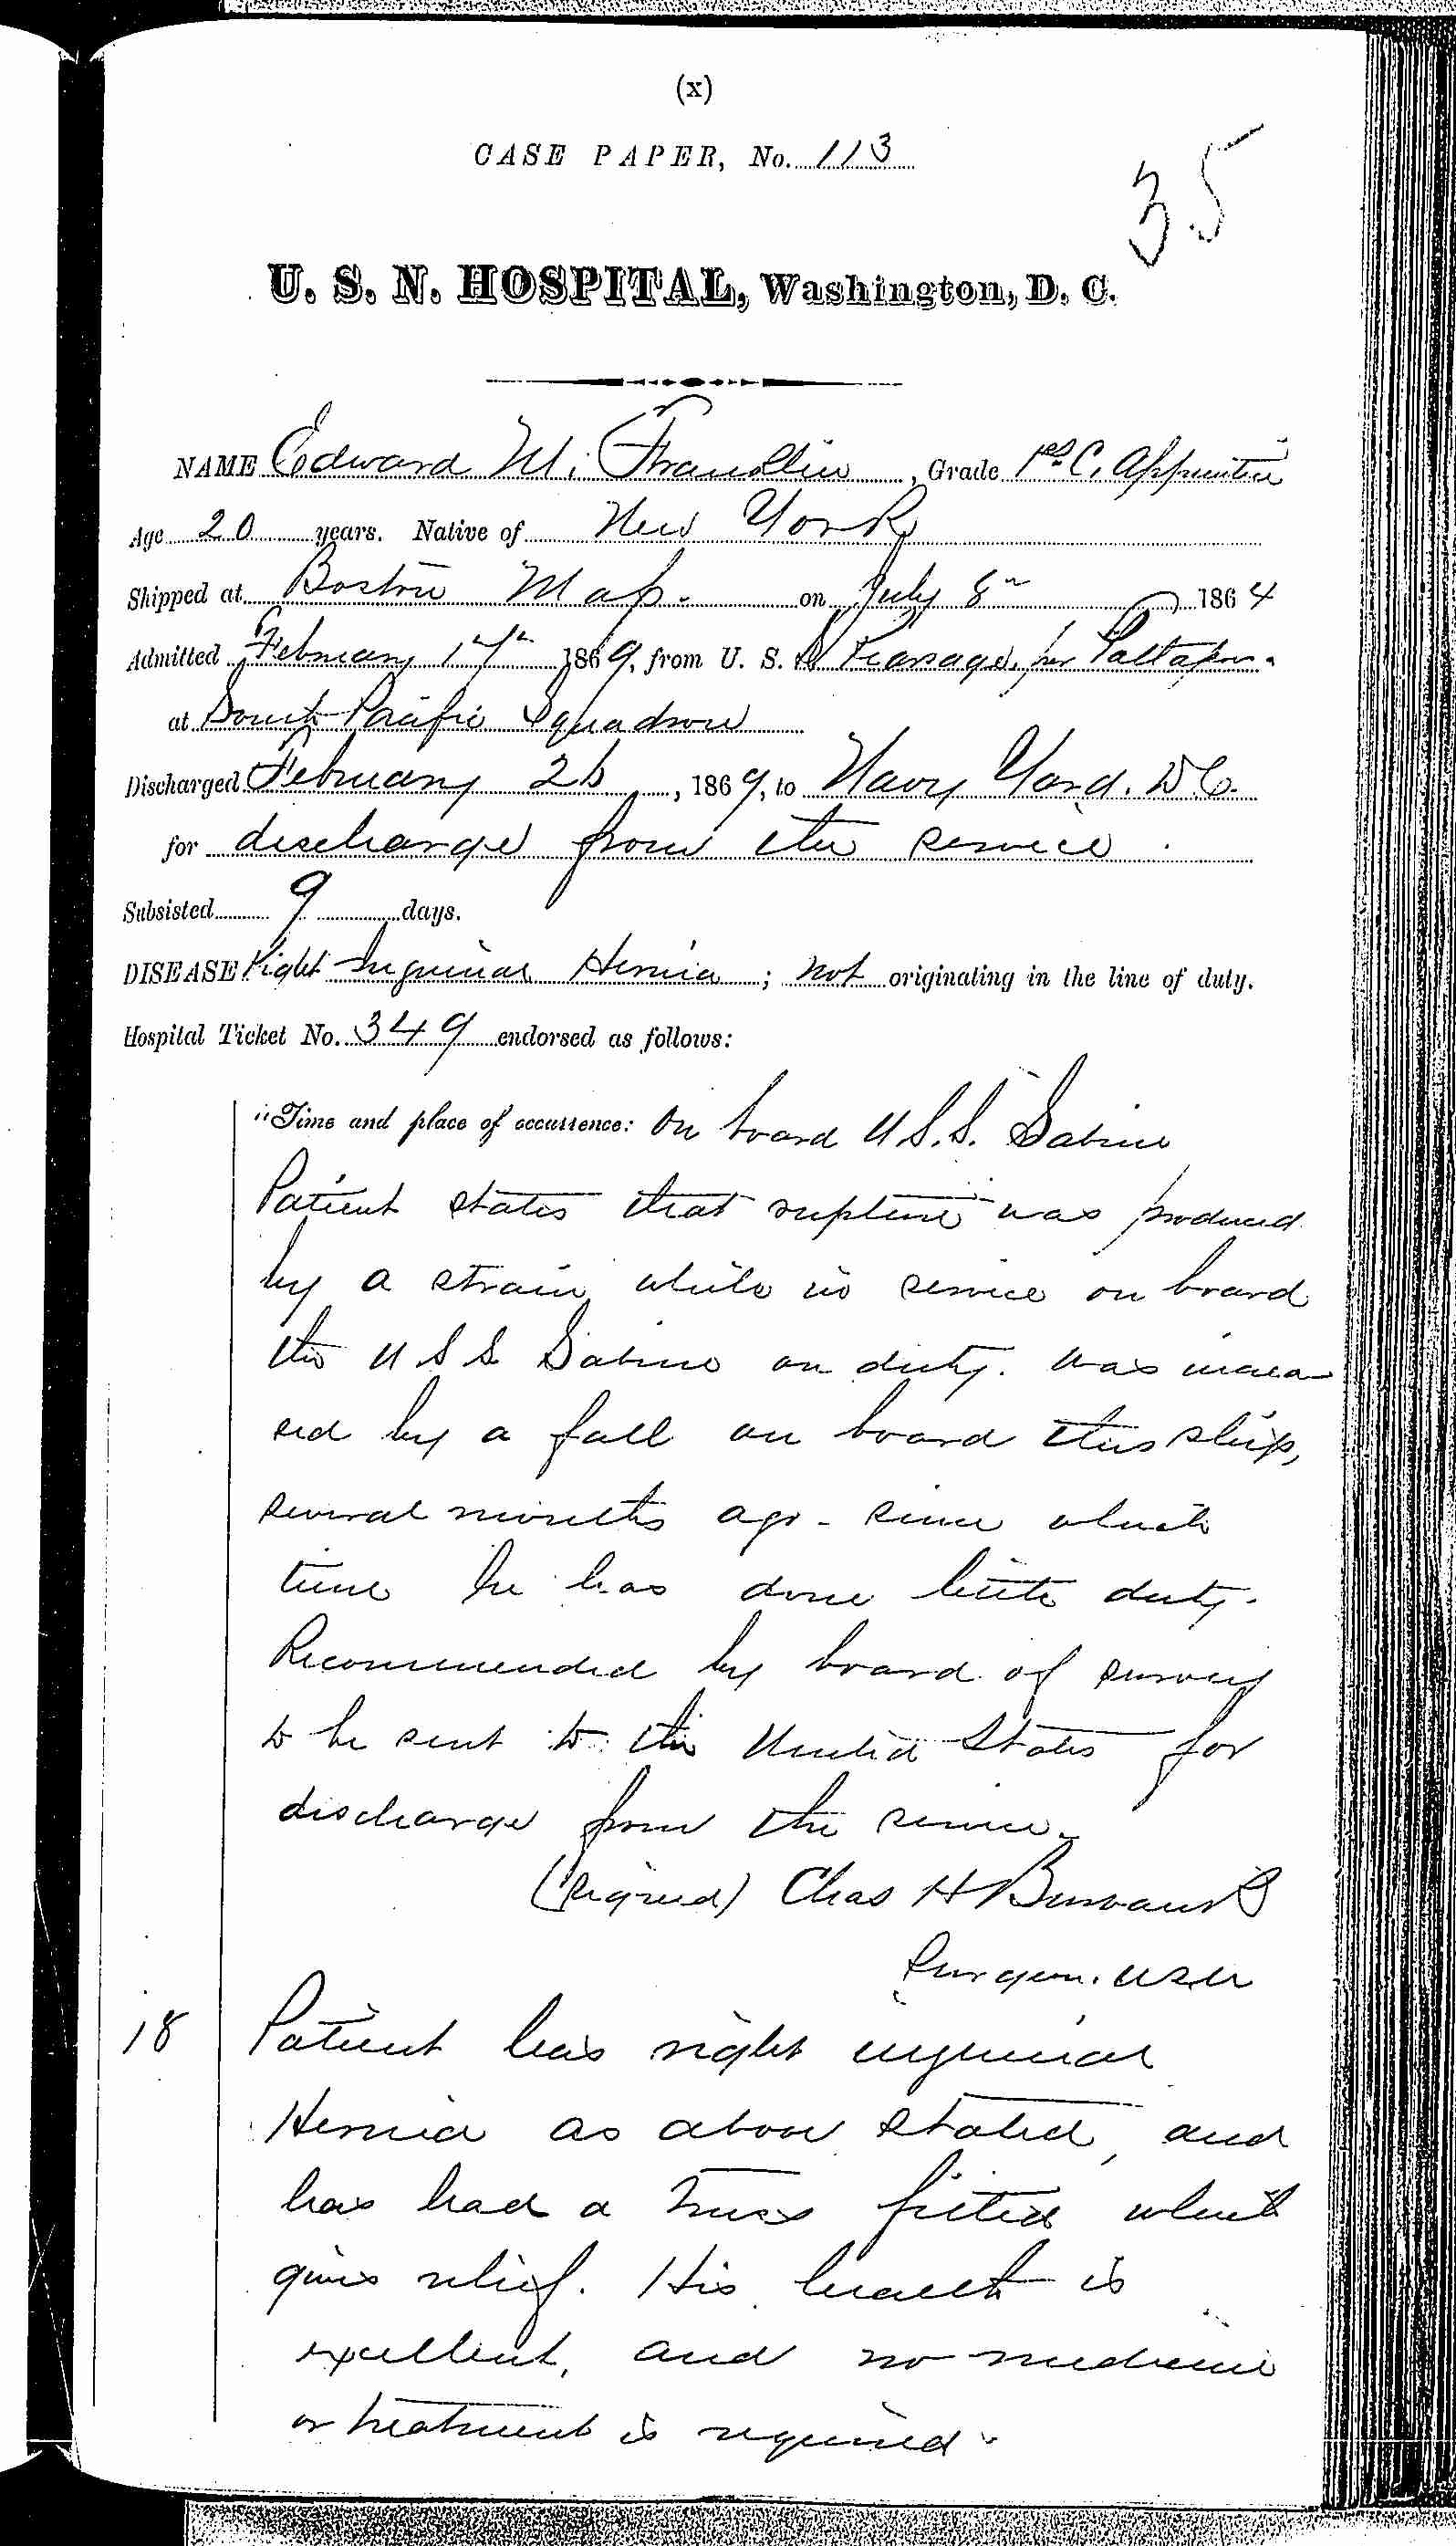 Entry for Edward W. Franklin (page 1 of 2) in the log Hospital Tickets and Case Papers - Naval Hospital - Washington, D.C. - 1868-69